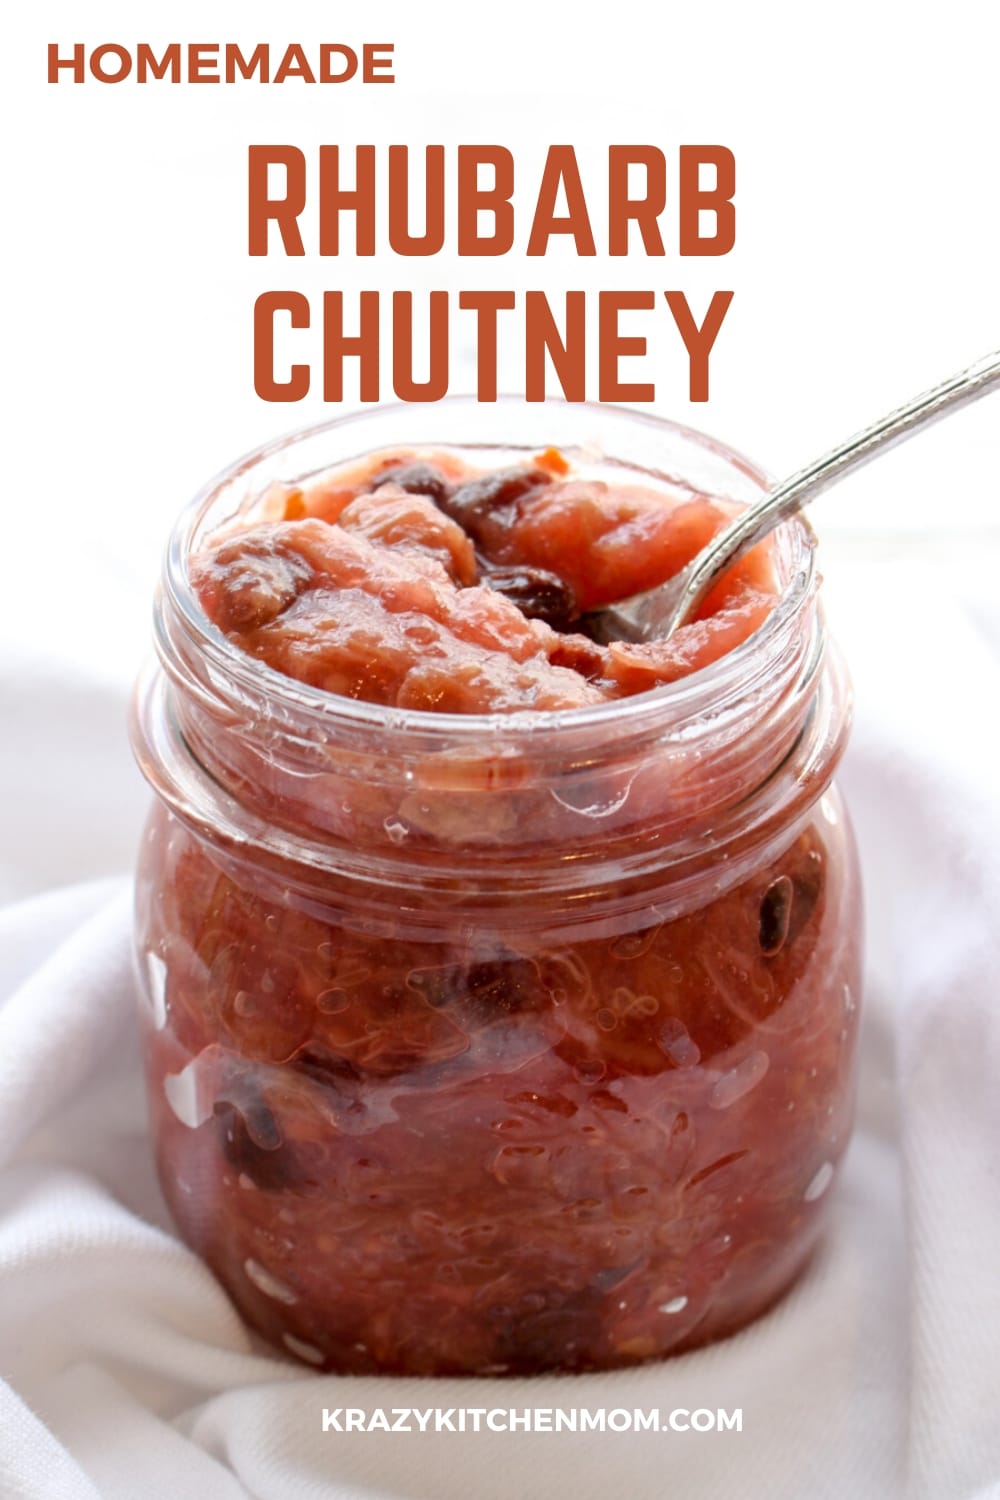 Sweet, tart and tangy Homemade Rhubarb Chutney is made from fresh or frozen rhubarb, dried fruit, savory spices, sugar, and vinegar. via @krazykitchenmom